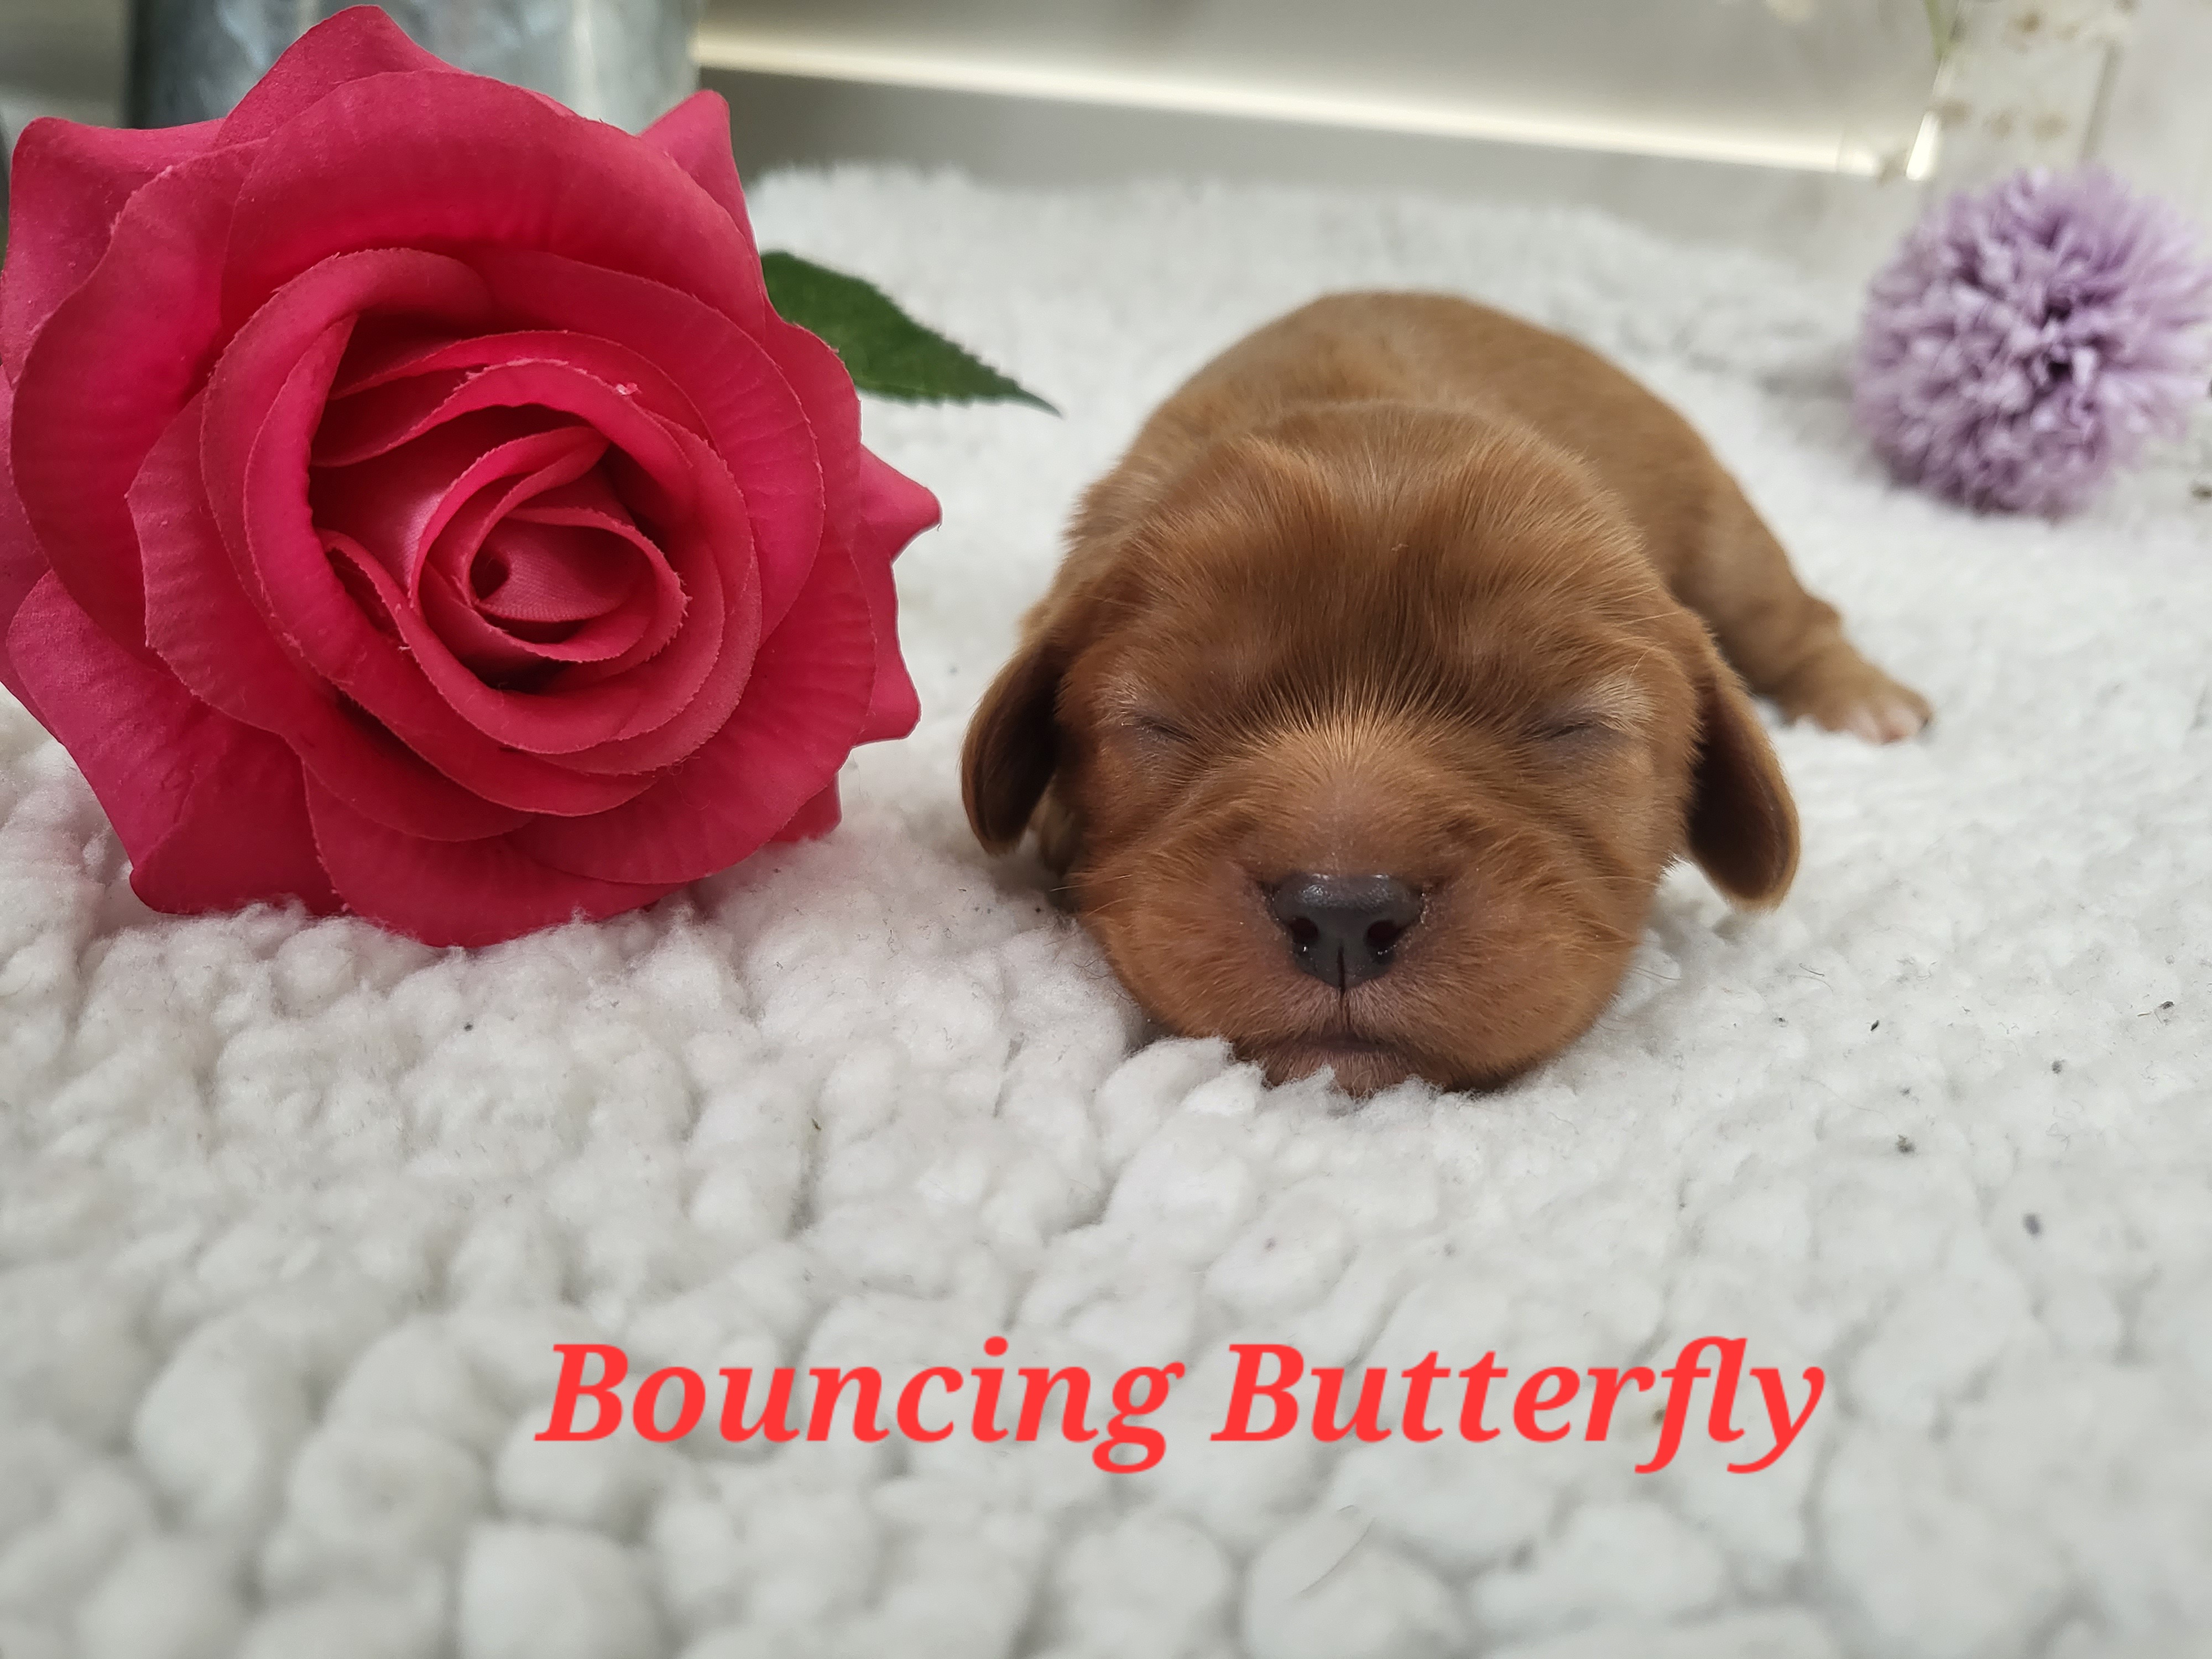 BOUNCING BUTTERFLY